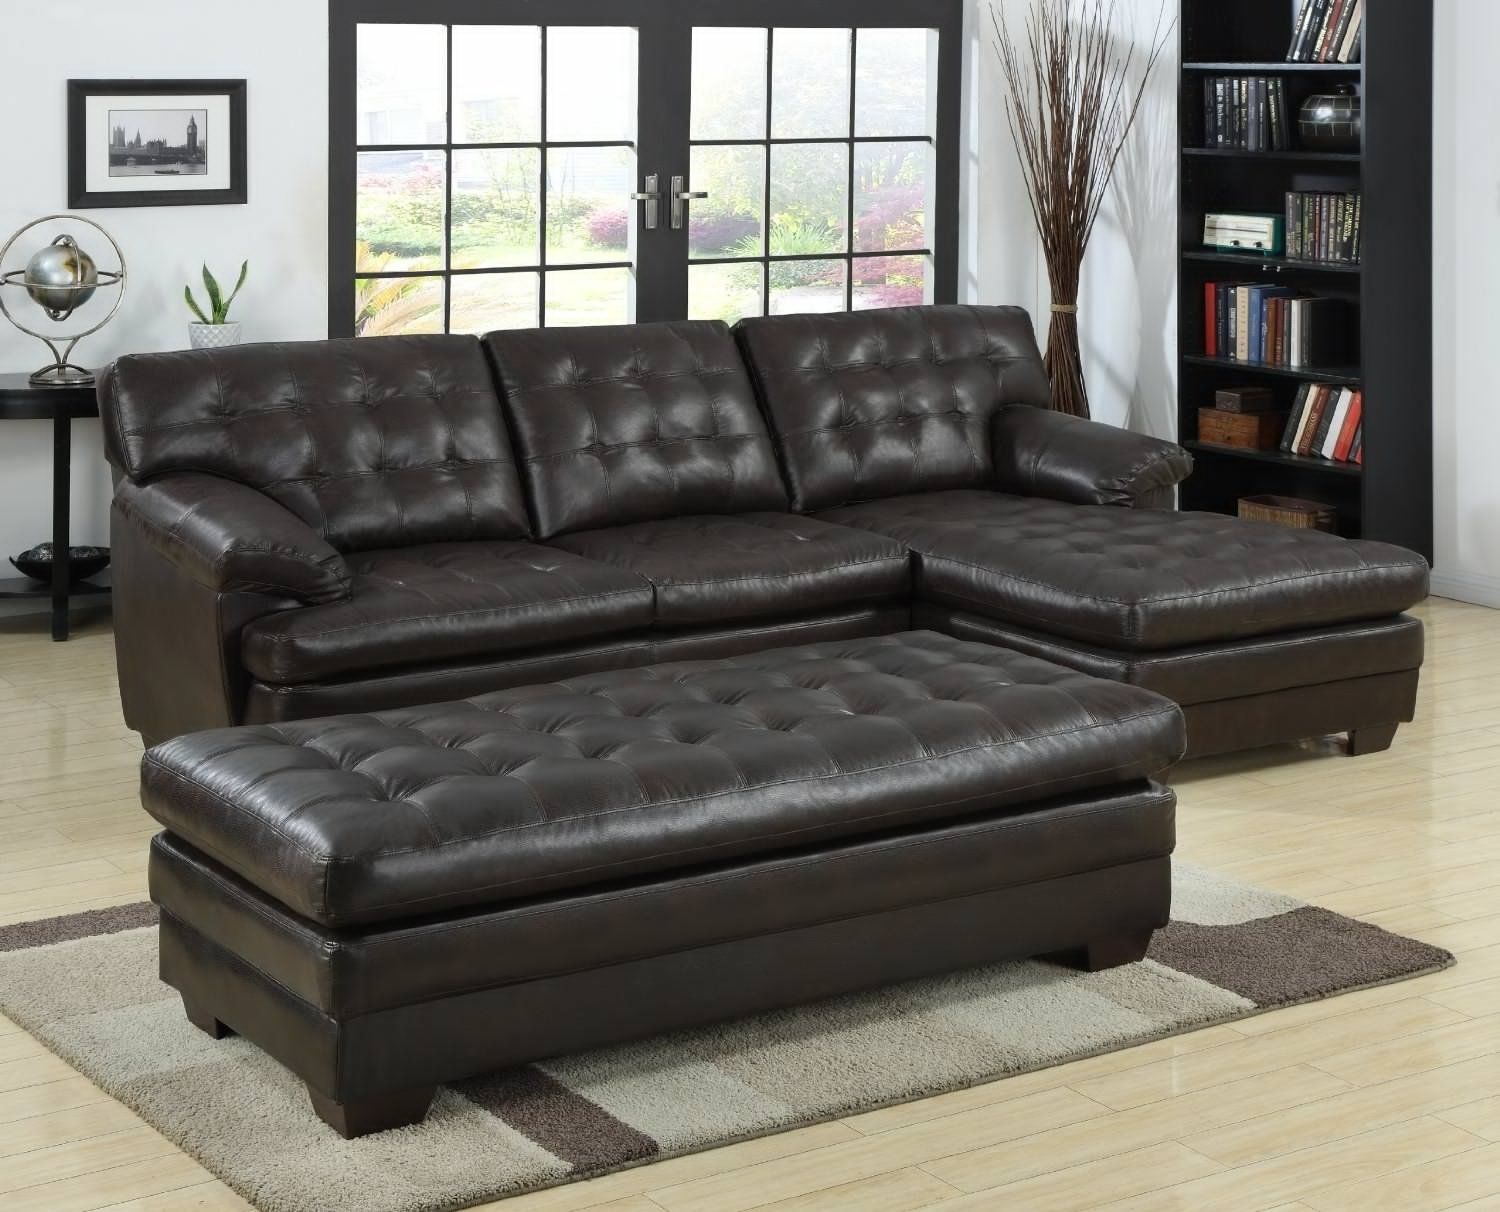 Sectional Sofa Design Piece With Chaise Sleeper Signature The Aid For Delano 2 Piece Sectionals With Laf Oversized Chaise (Photo 6326 of 7825)